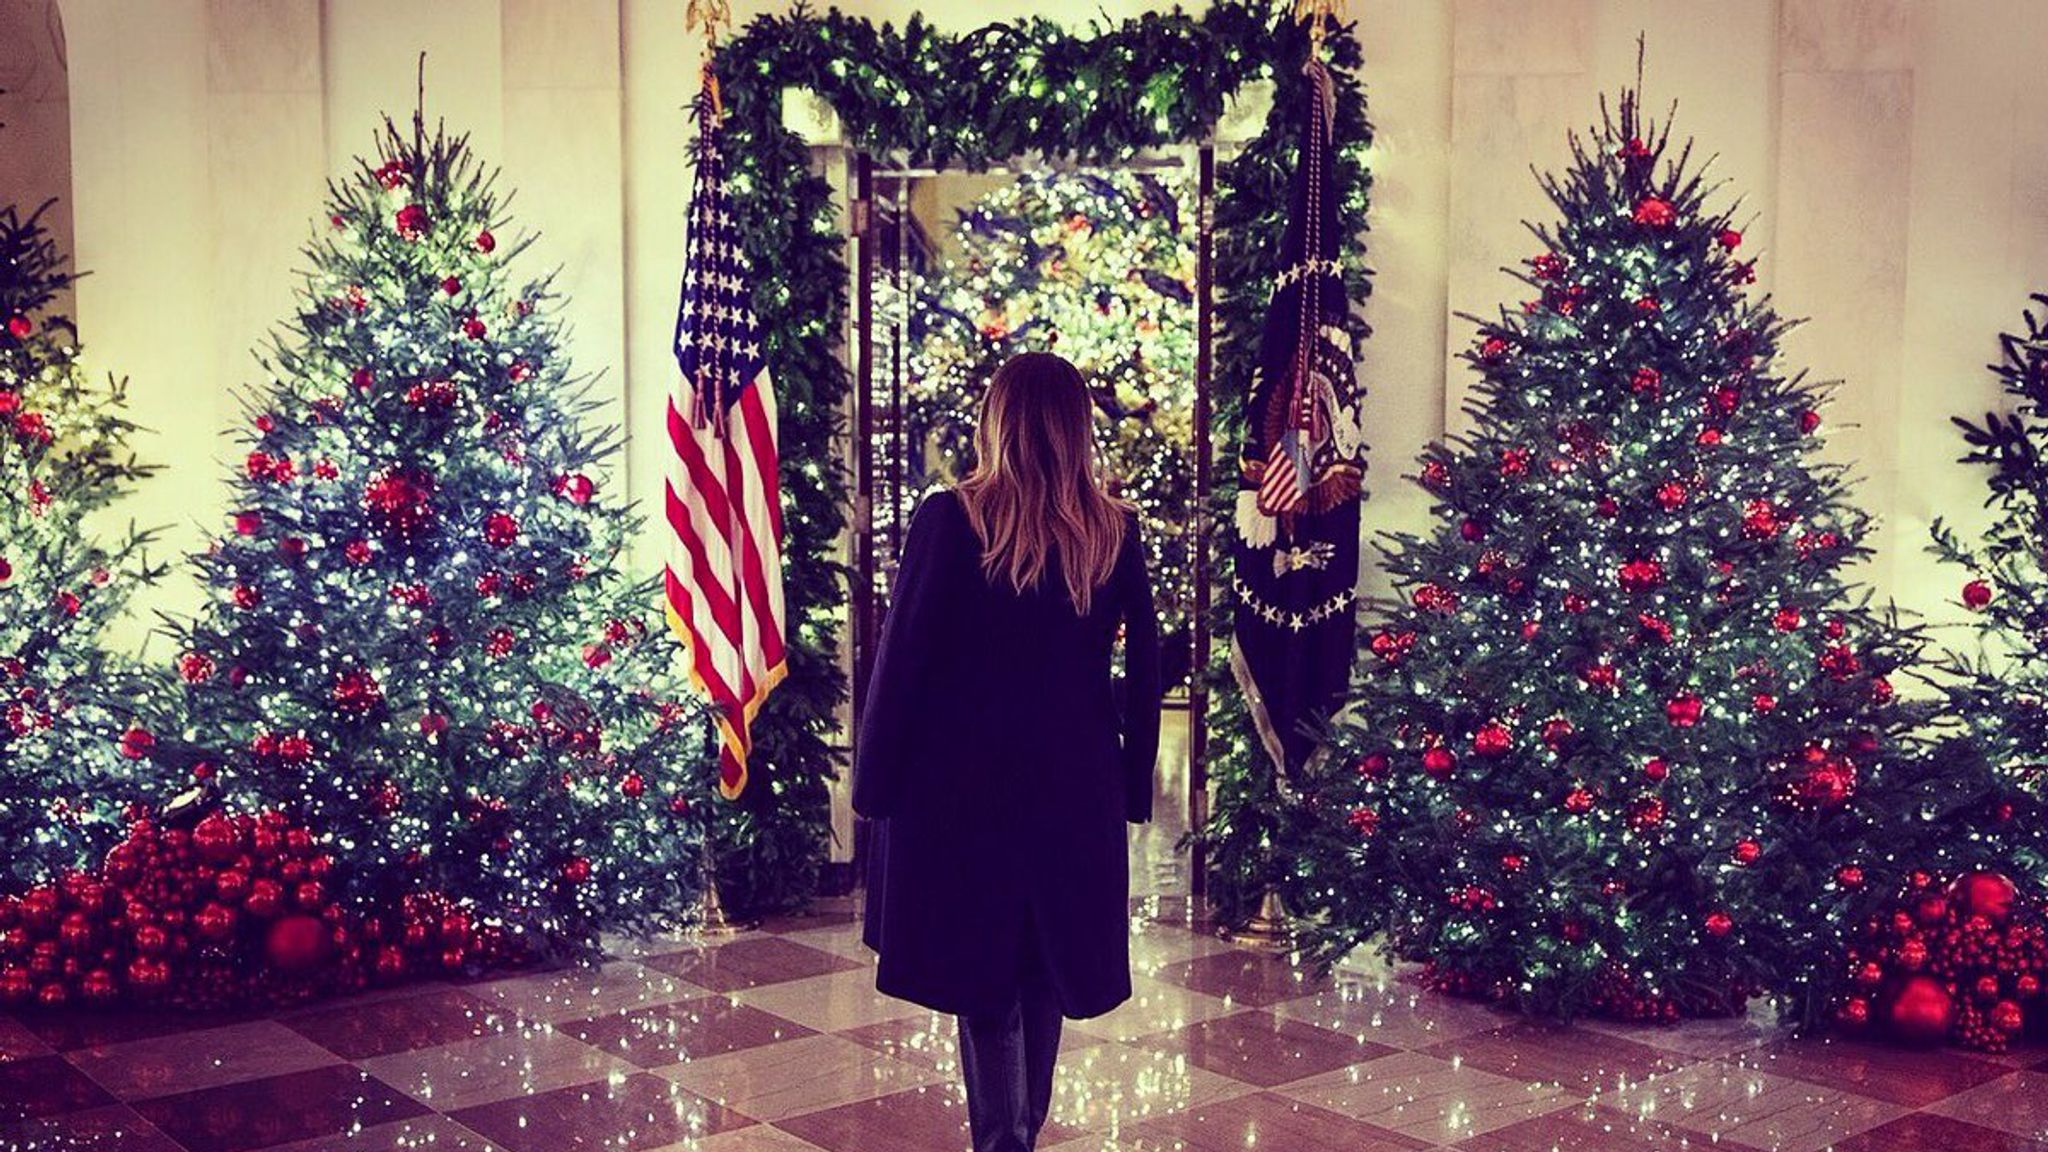 Melania Trump's White House Christmas decorations divide opinion US